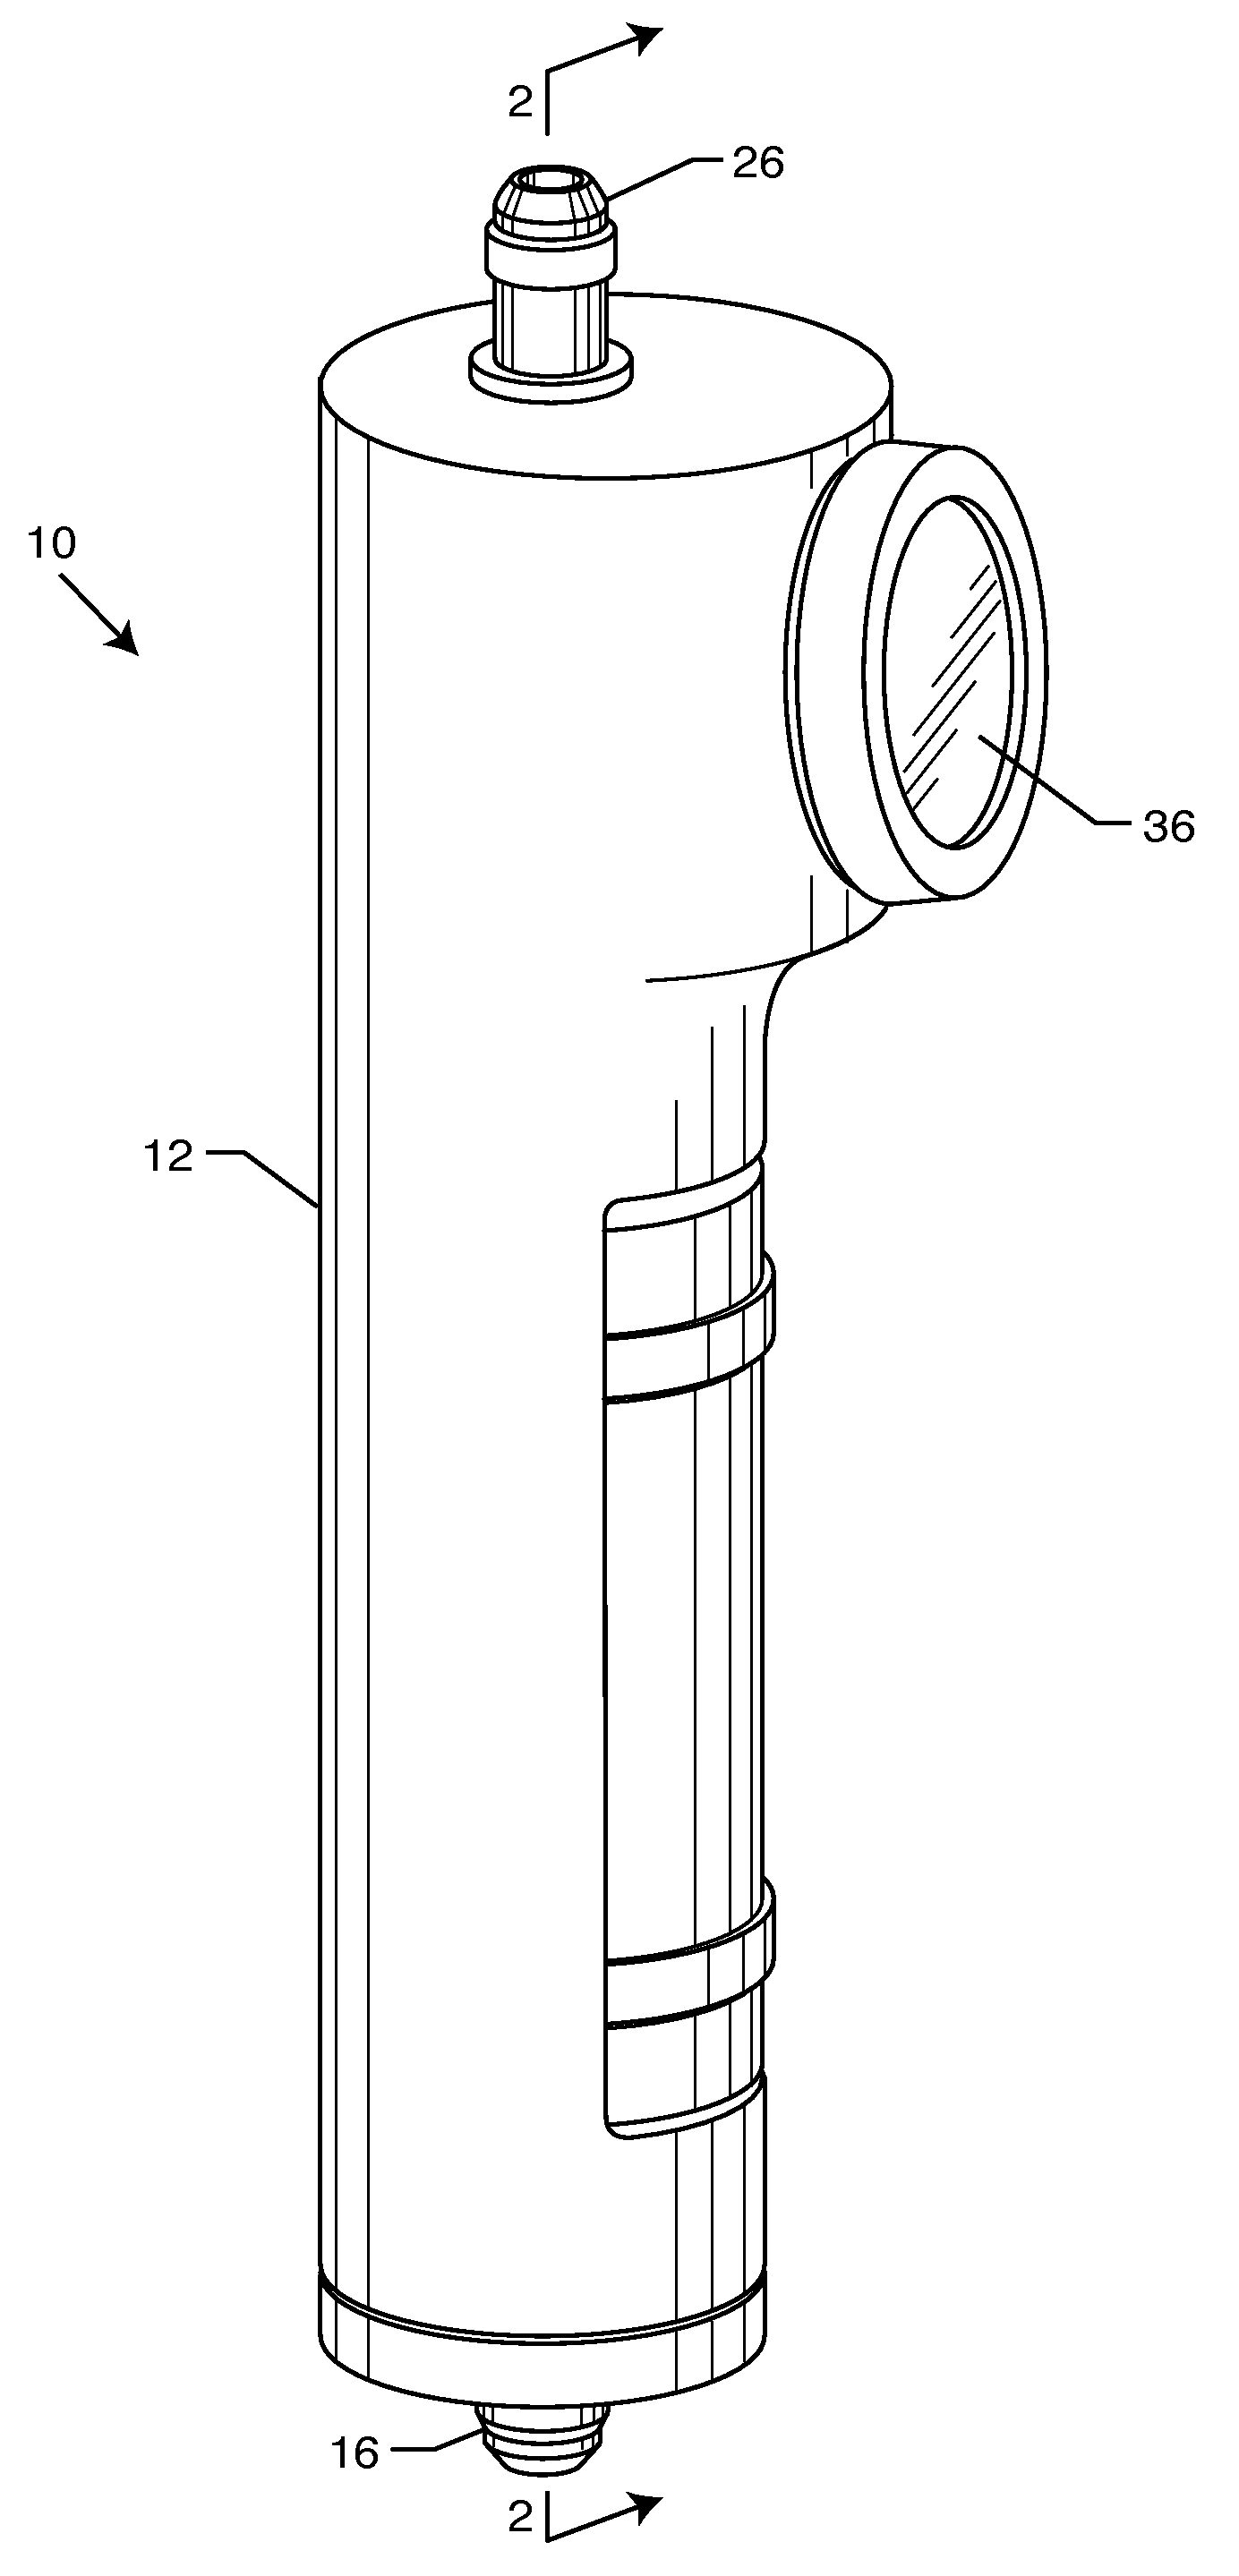 Apparatus and method for generating cavitational features in a fluid medium